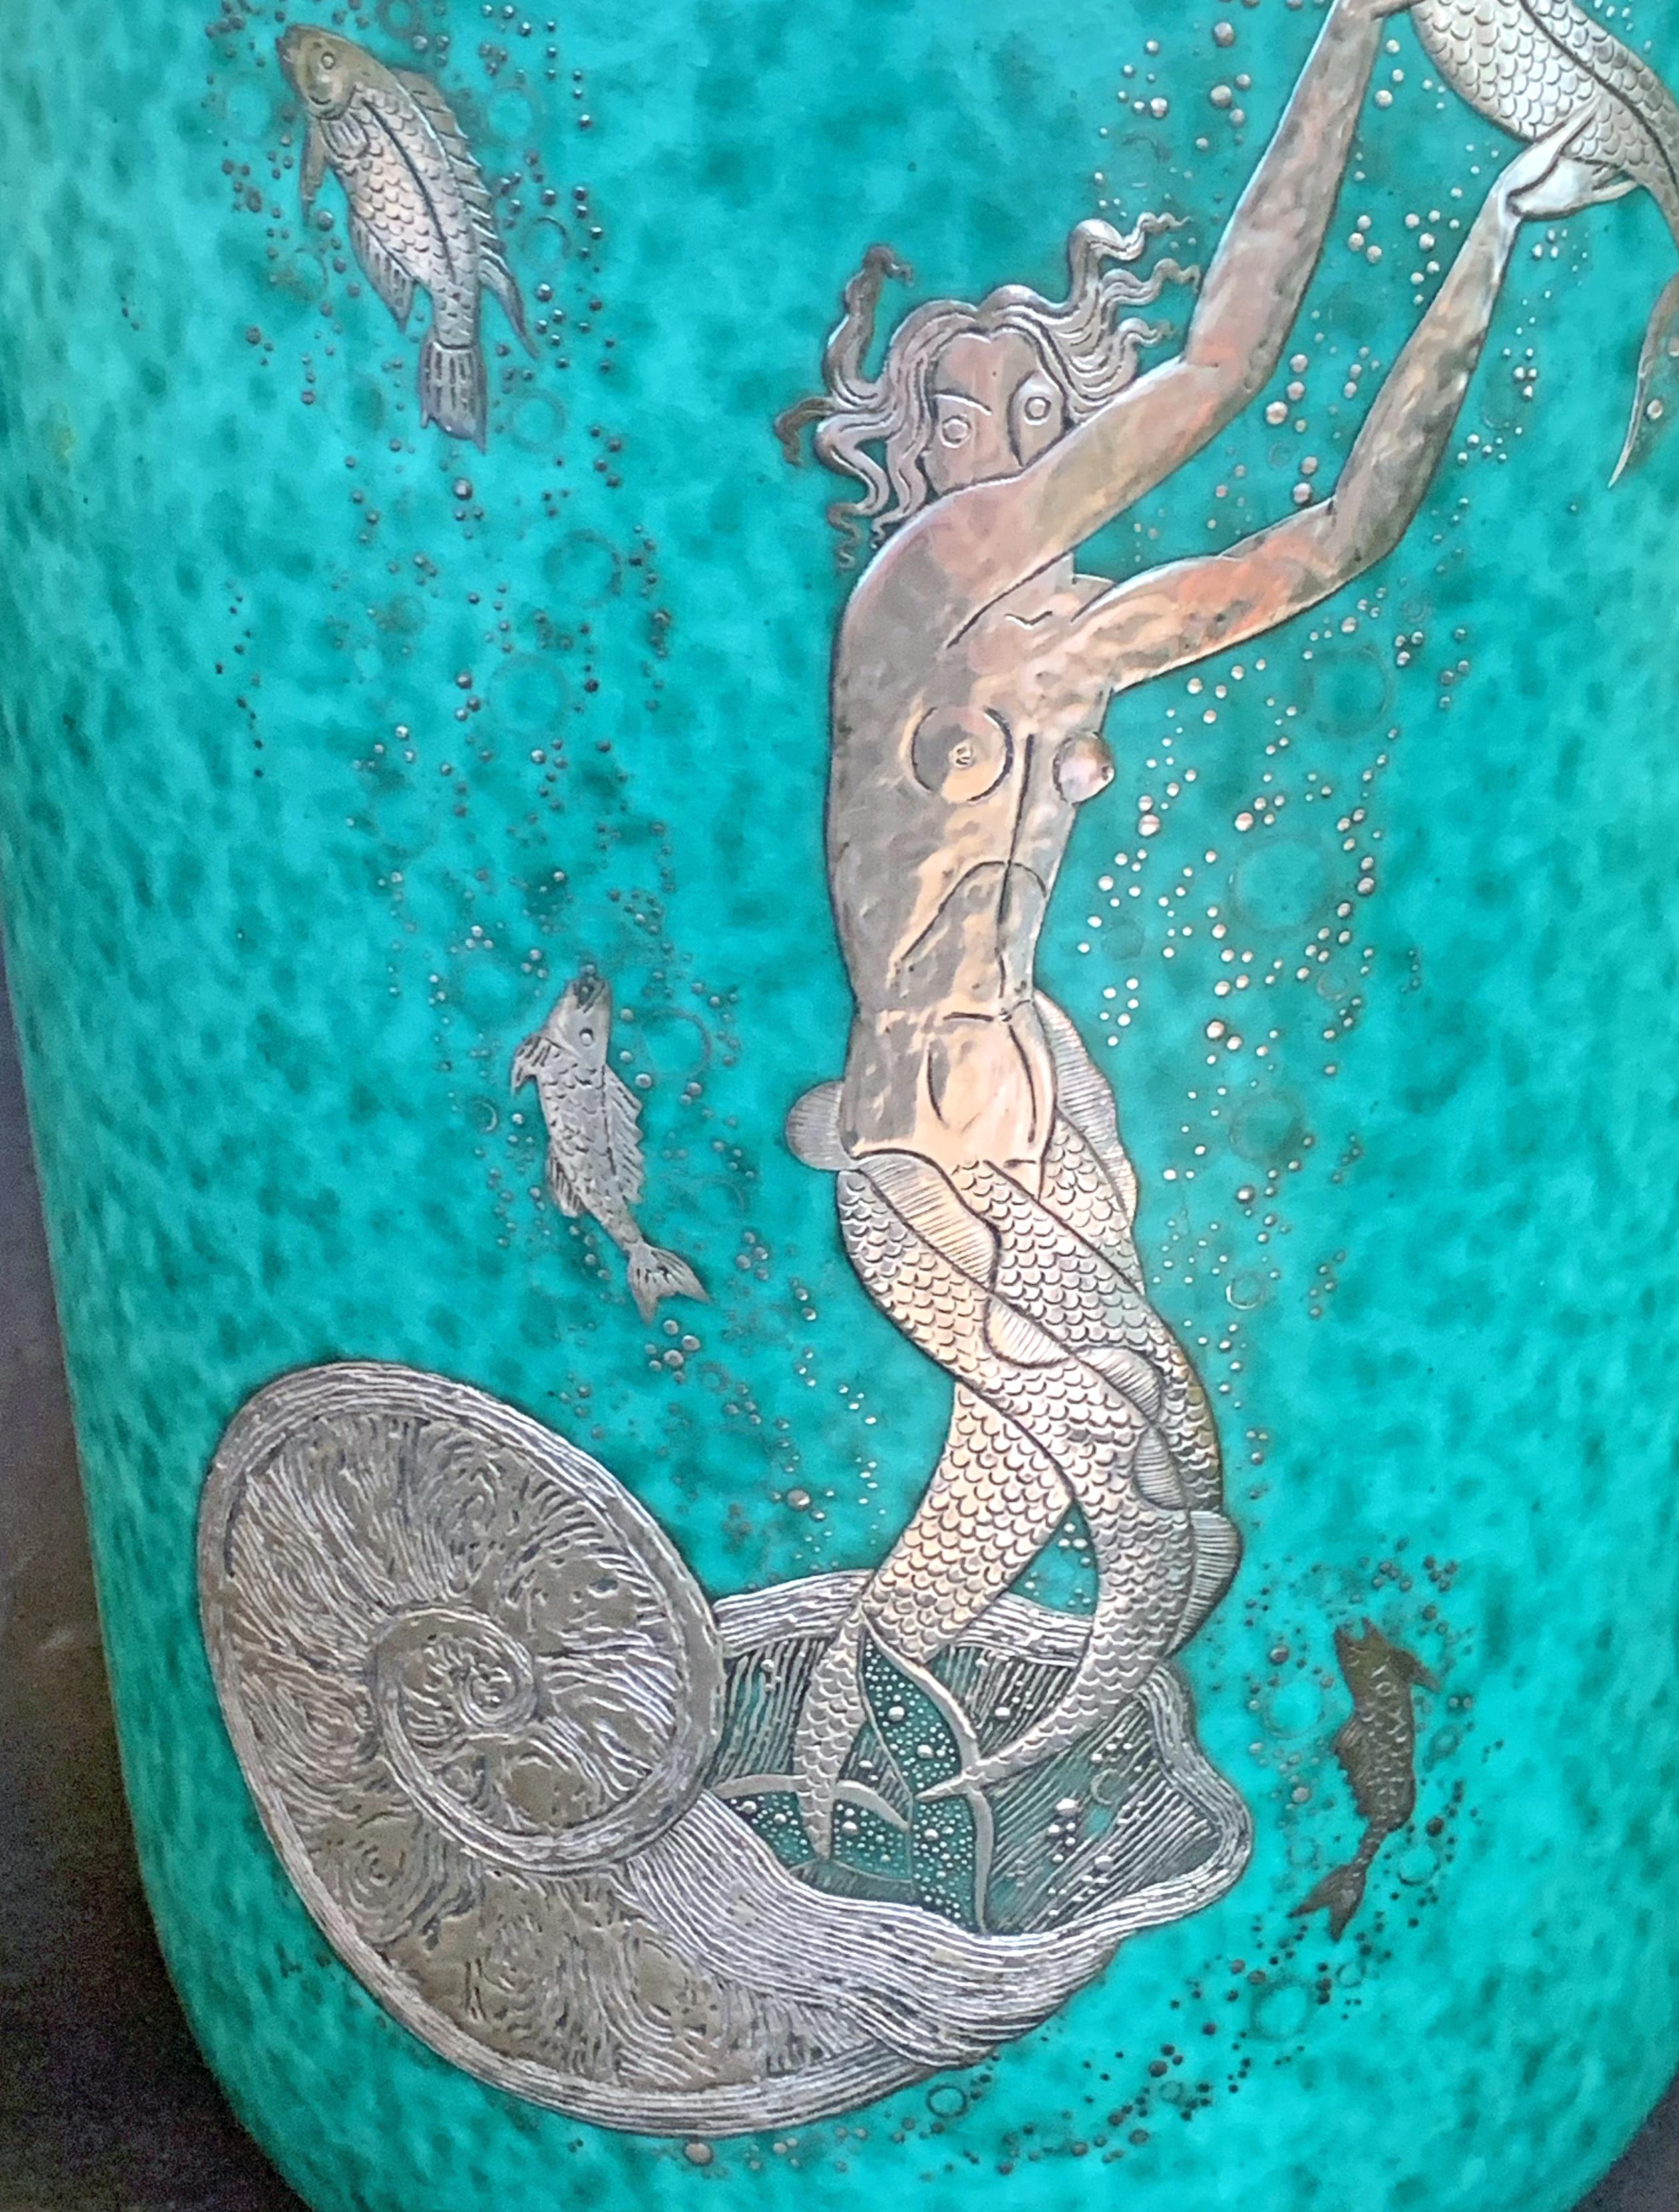 Finished in tooled silver and a brilliant green-turquoise glaze, this unusually tall Argenta vase by Gustavsberg depicts a mermaid emerging from a nautilus shell, reaching for a large fish surrounded by a cloud of bubbles. This piece is part of a